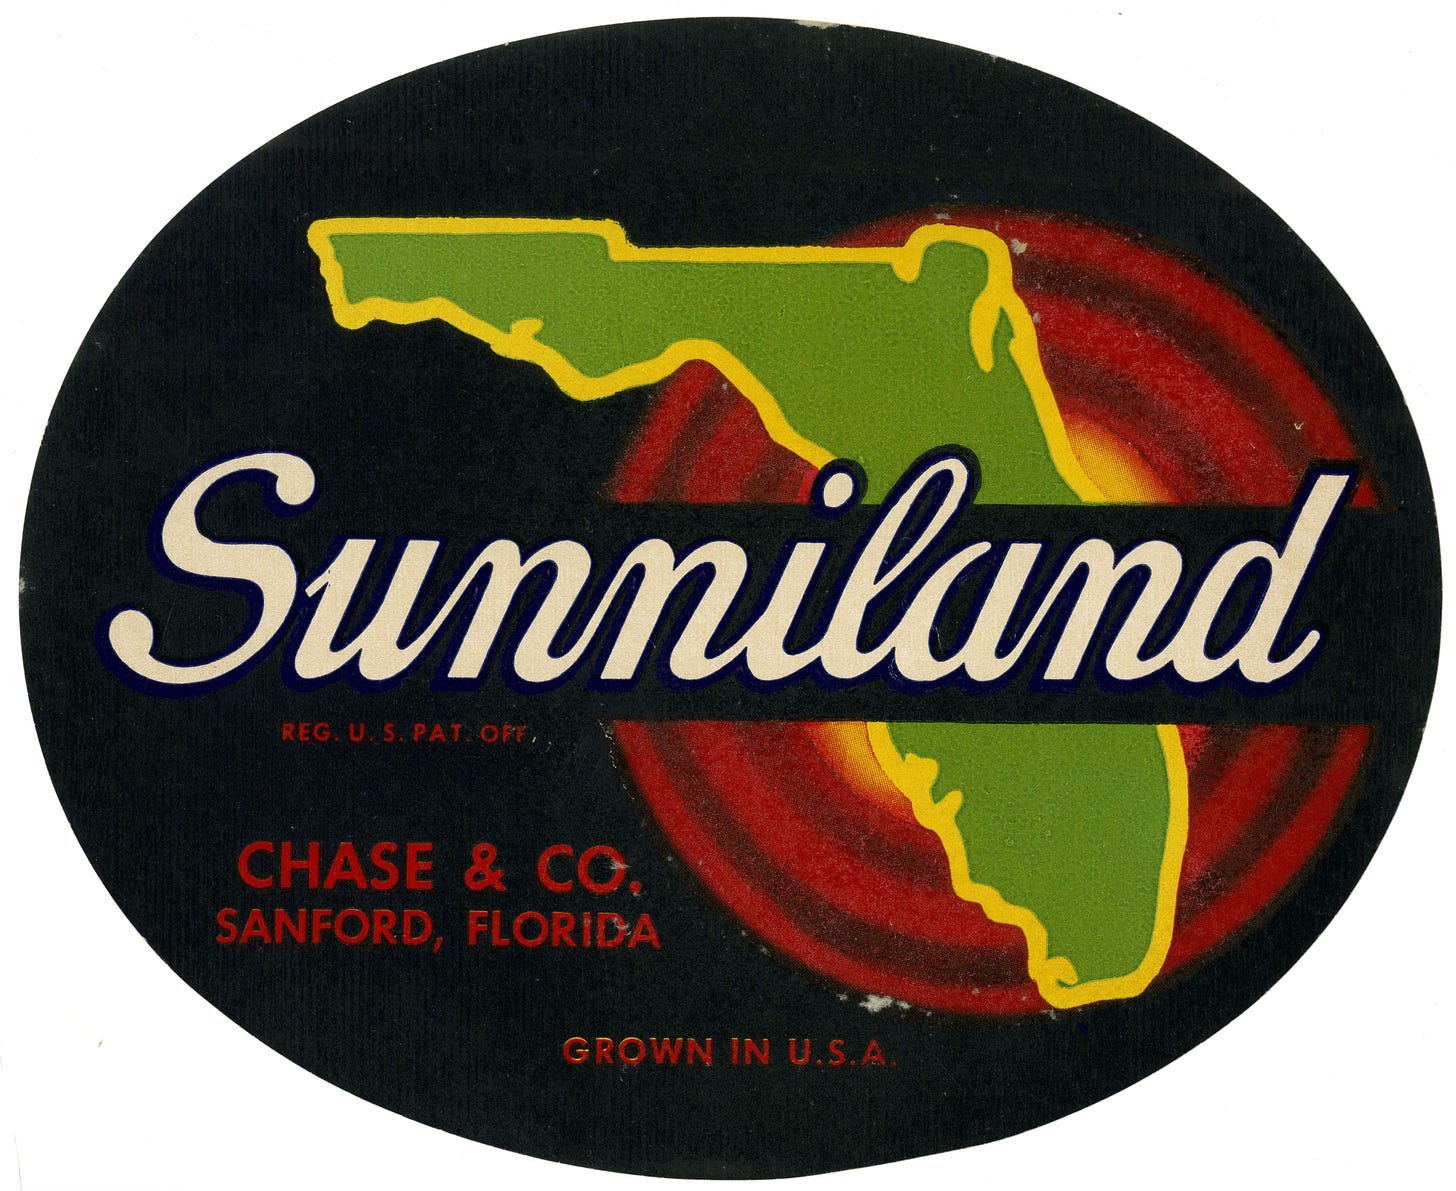 A citrus label with image of Florida map in green and Sunniland written across center.